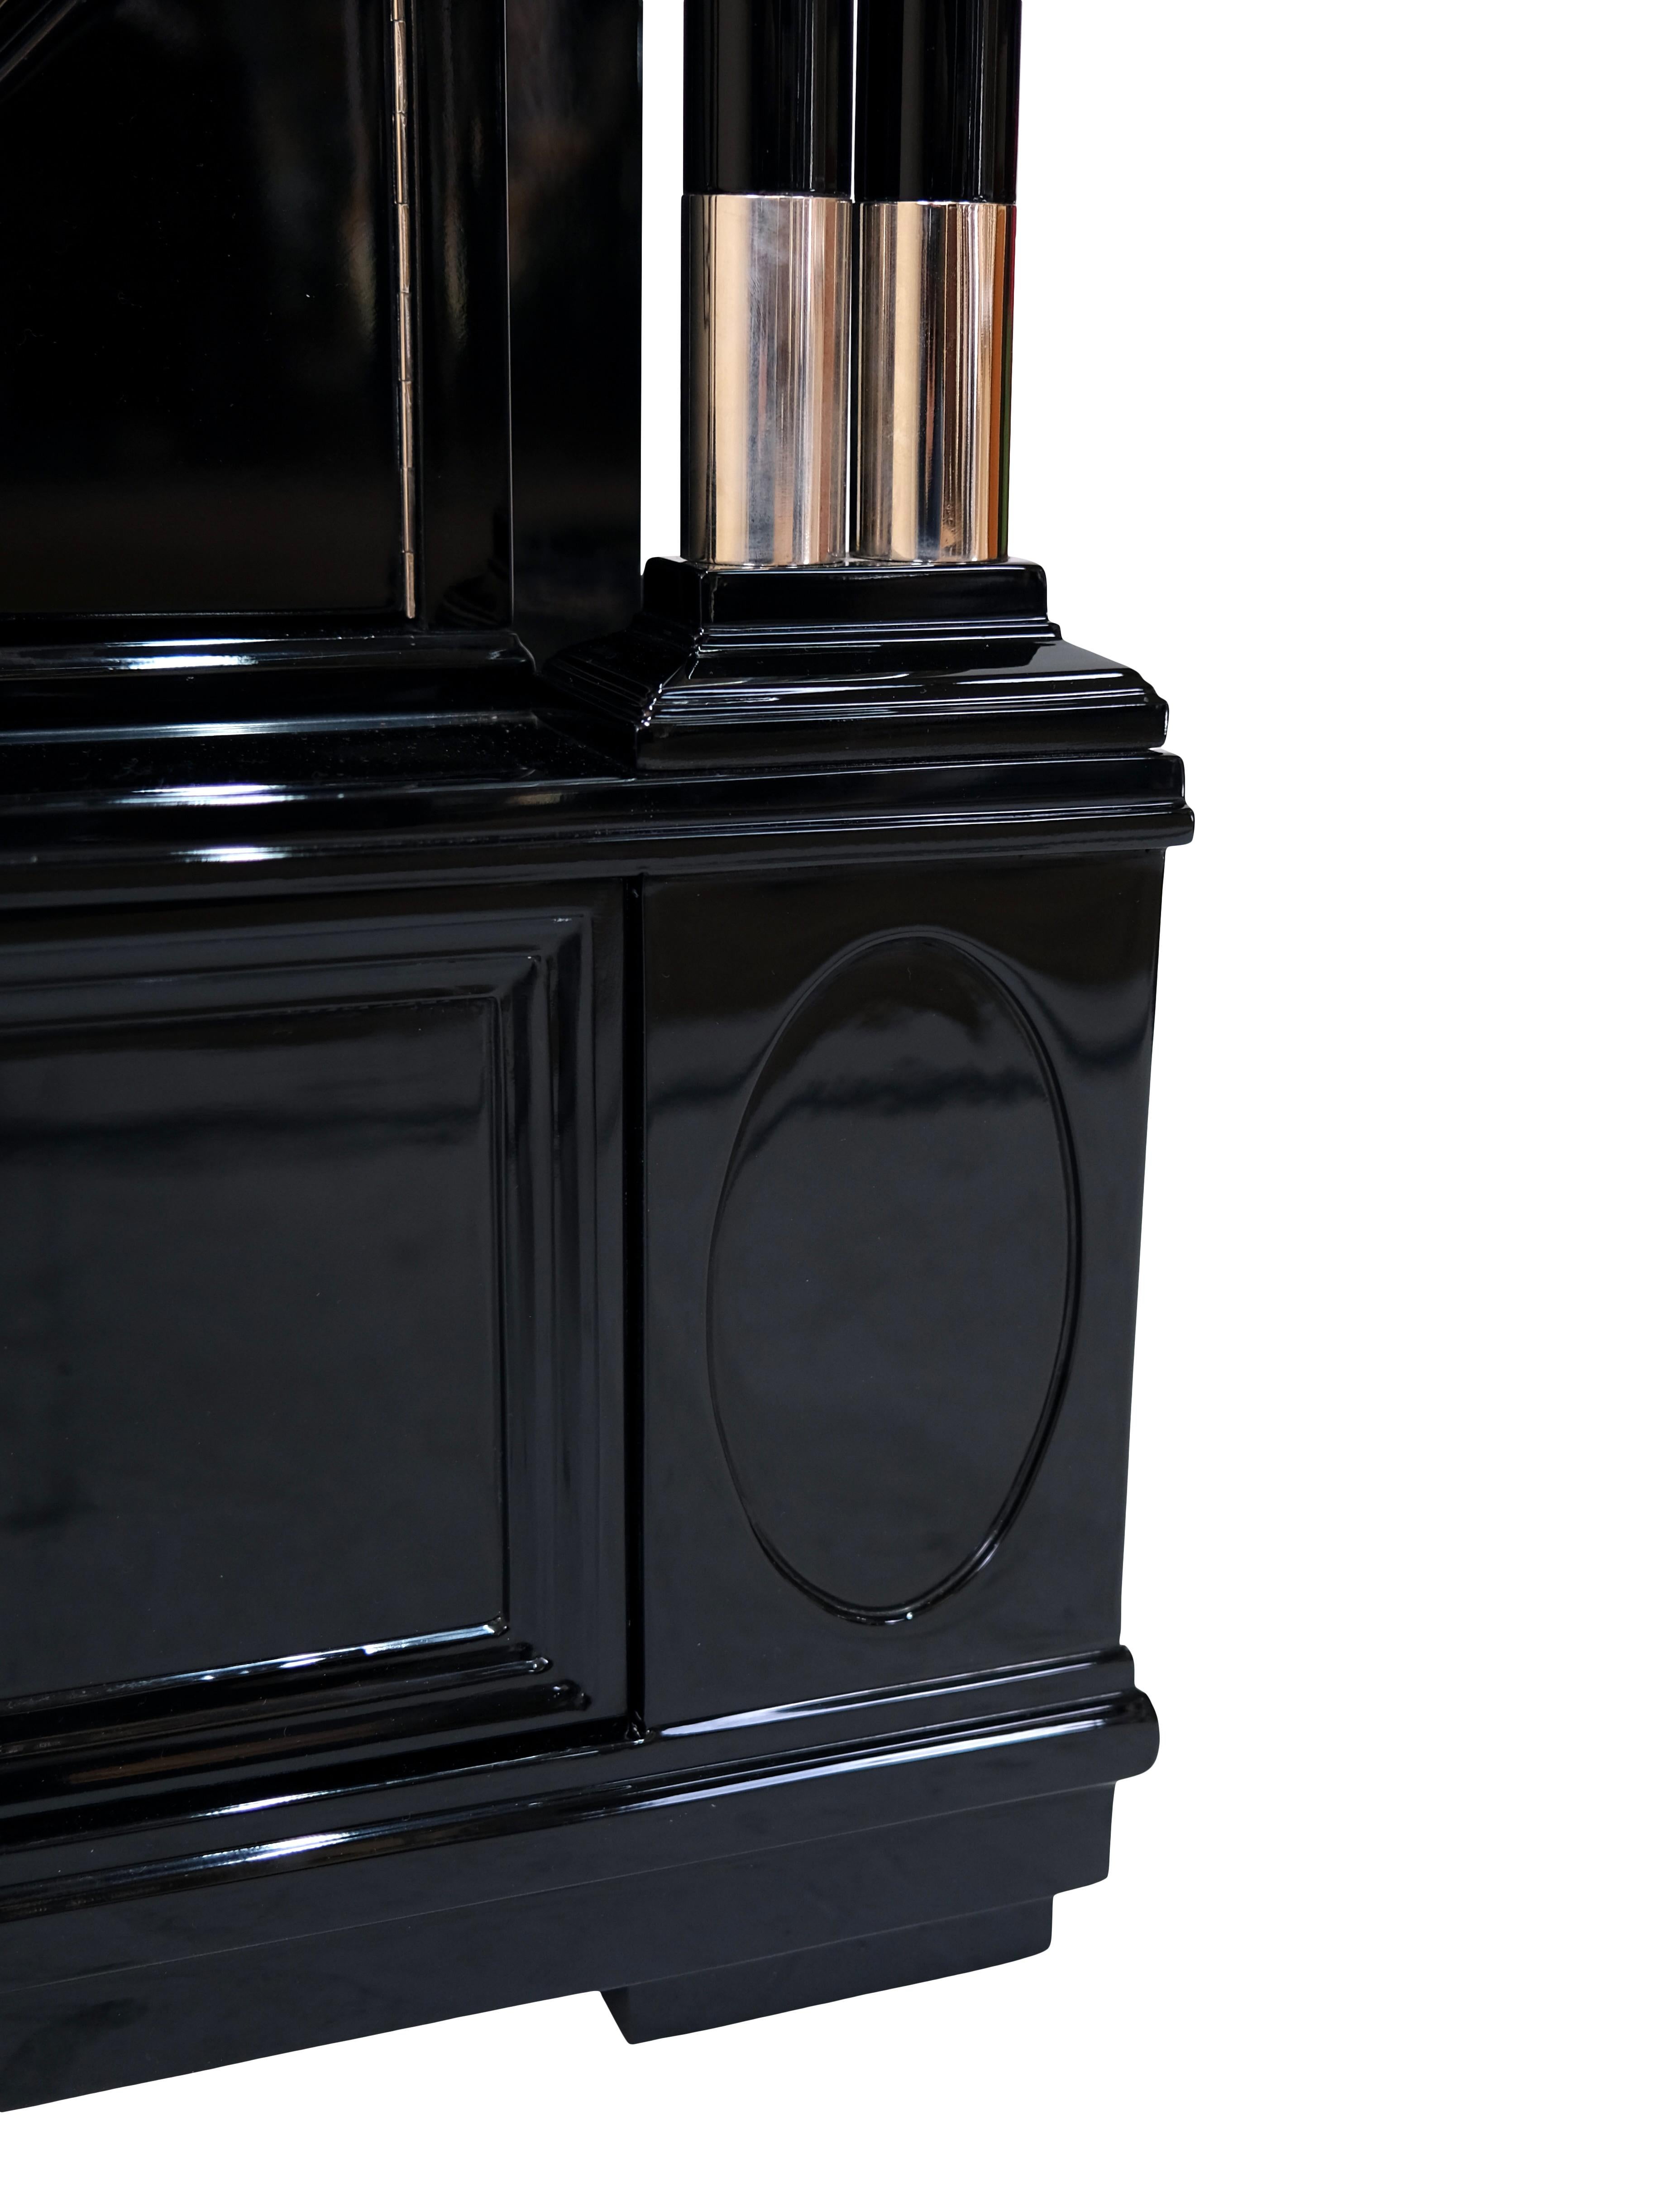 Mid-20th Century 1930s Art Deco Furniture with Columns in Black Lacquer with Nickeled Details